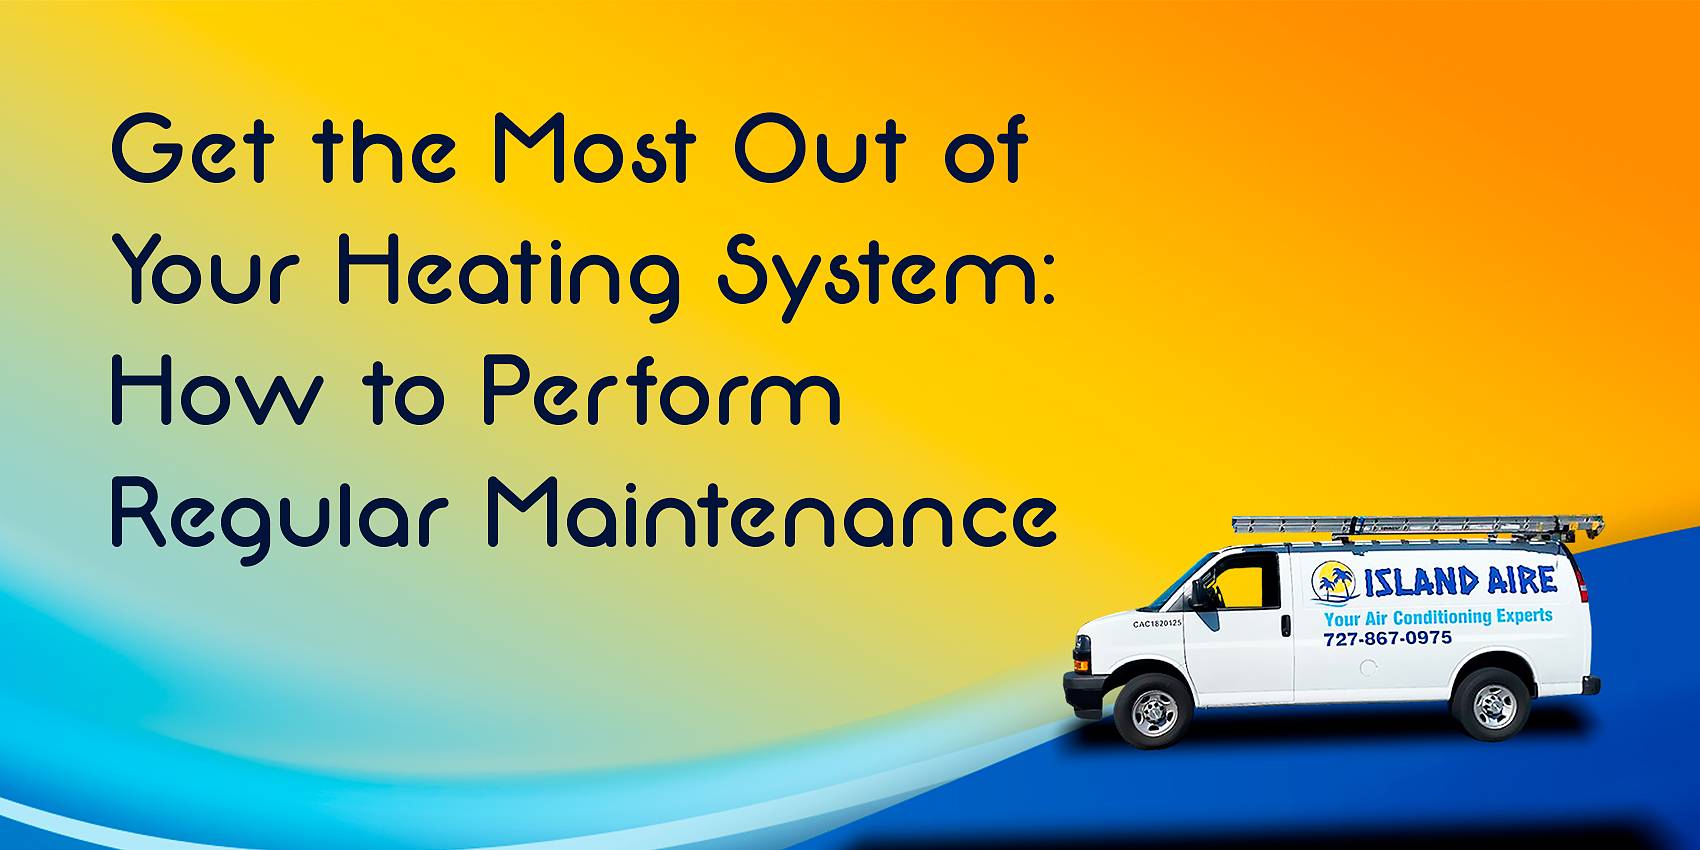 Get the Most Out of Your Heating System: How to Perform Regular Heating Maintenance